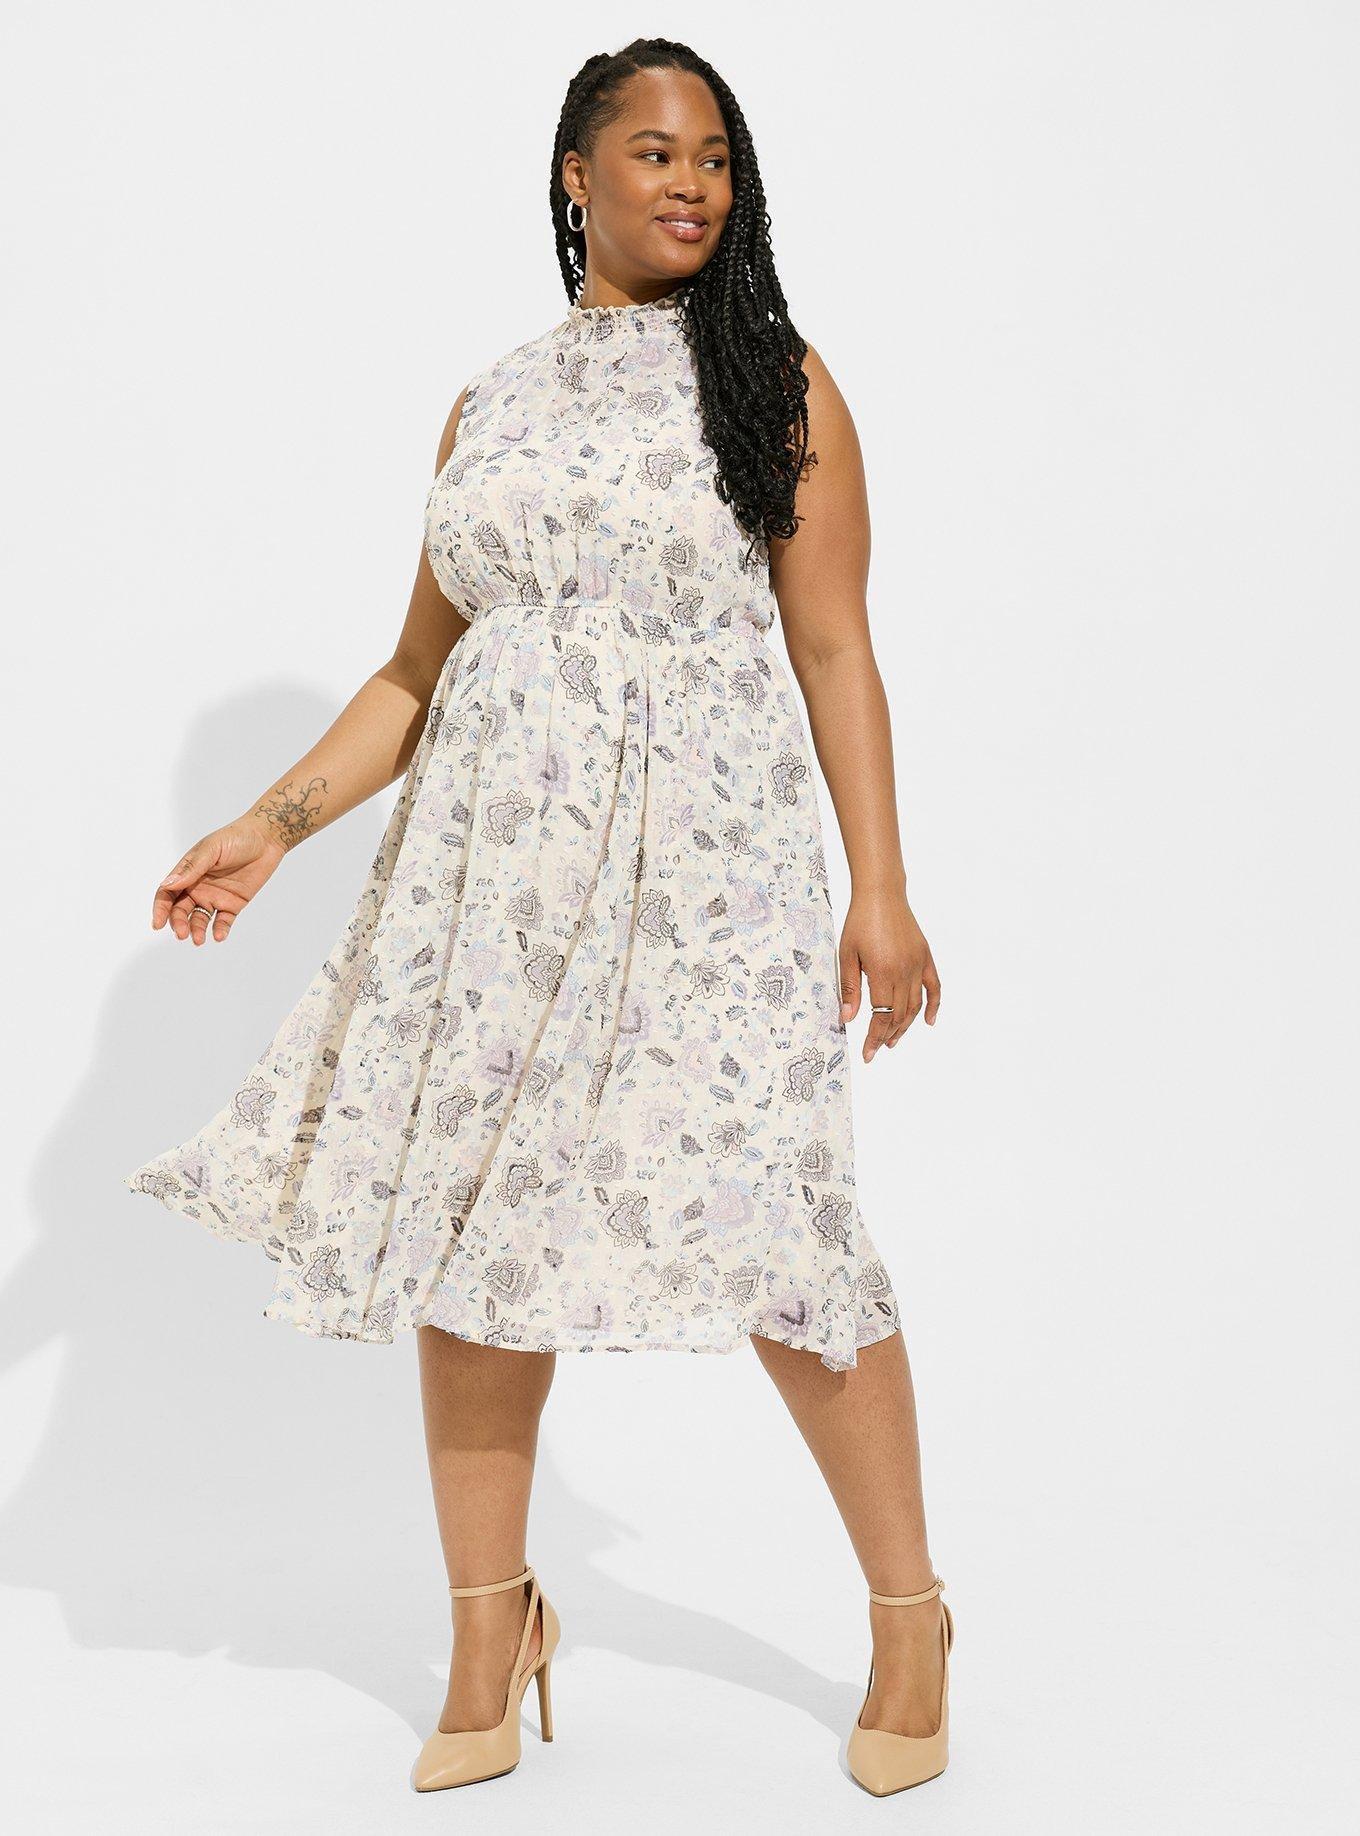 Plus Size Clothing in Thunder Bay, ON at Torrid